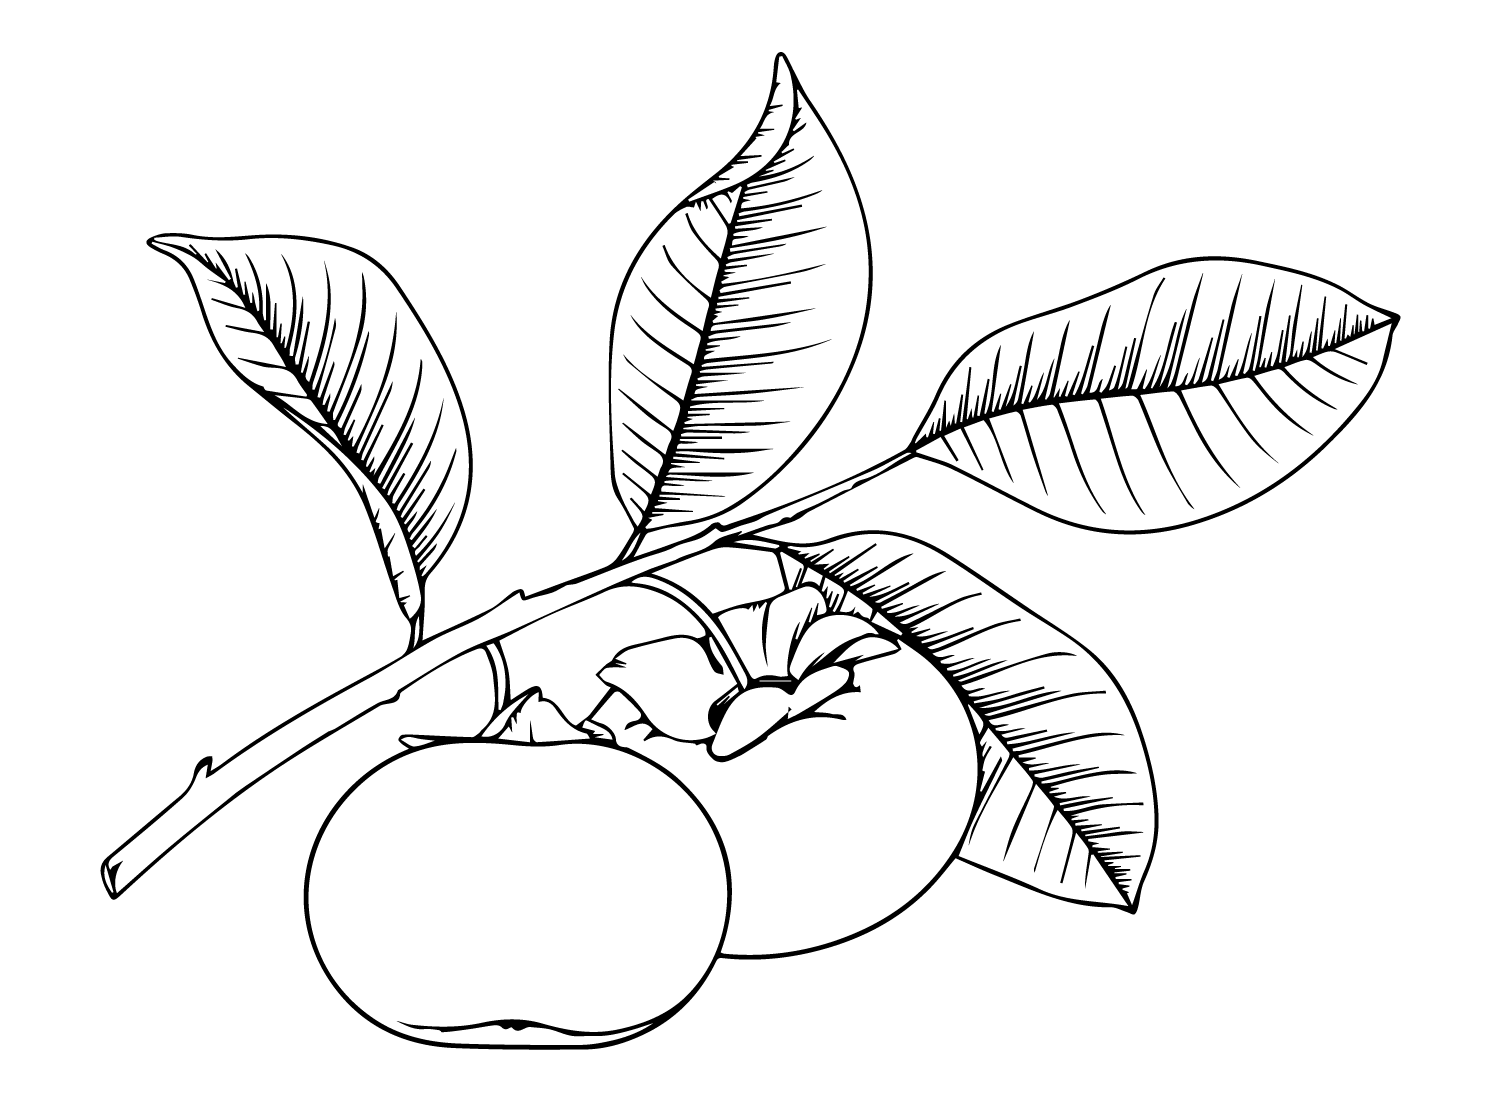 Drawing Persimmon from Persimmon